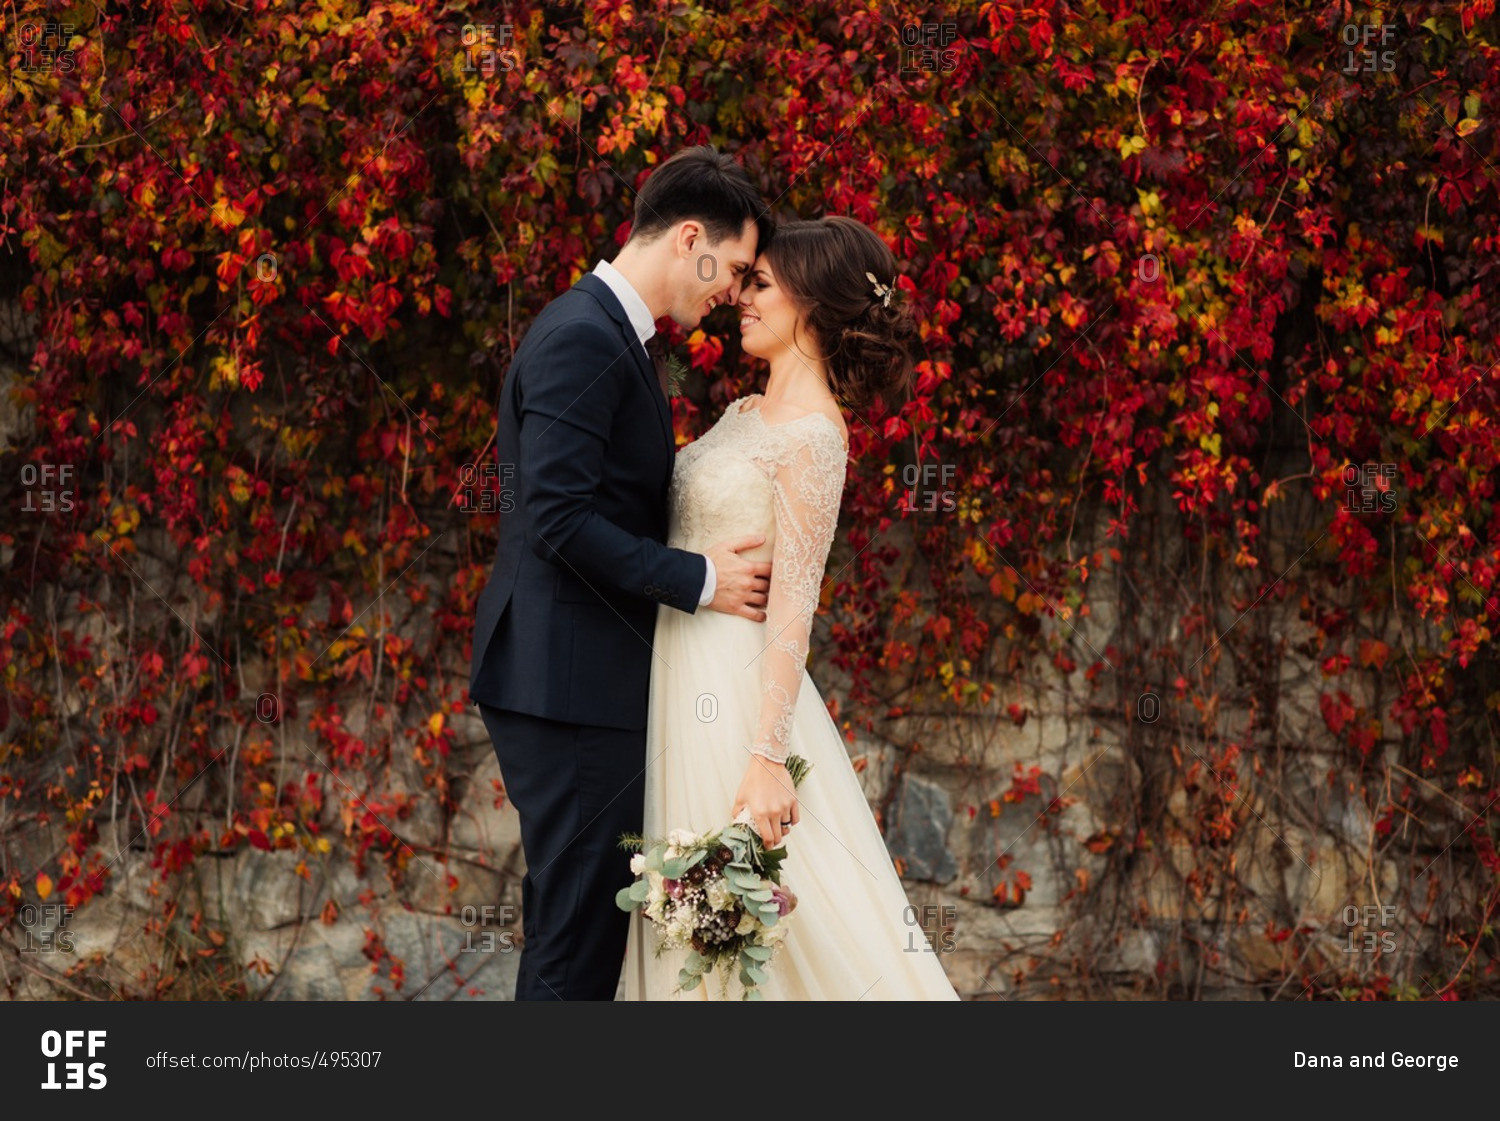 Bride and groom embraced by colorful fall vines